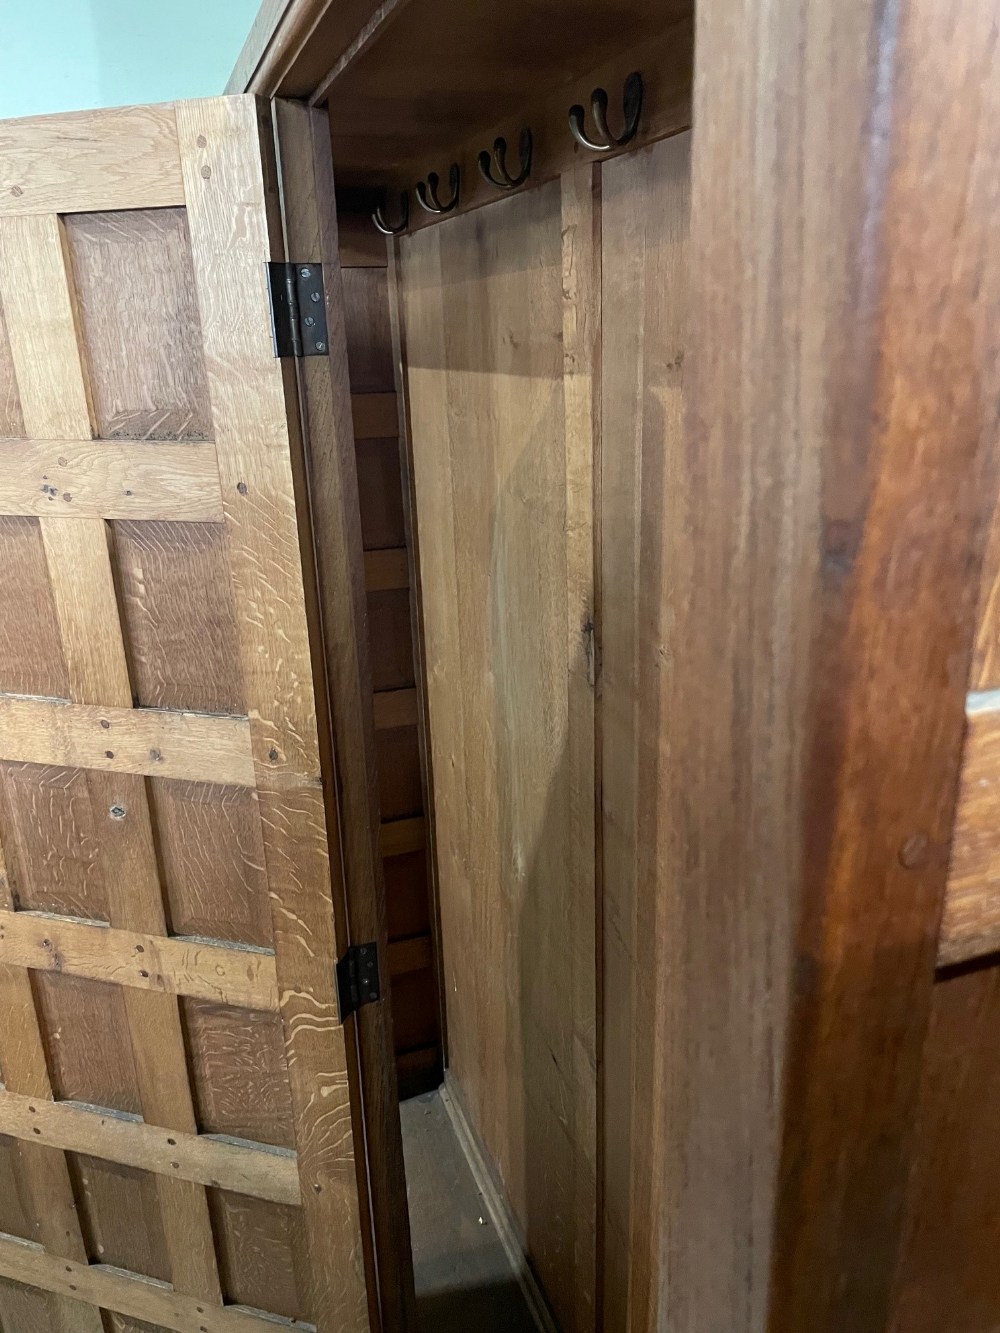 EARLY 20TH CENTURY OAK PANELLED DOUBLE WARDROBE IN THE MANNER OF THE COTSWOLD SCHOOL, THE TWO - Image 6 of 7